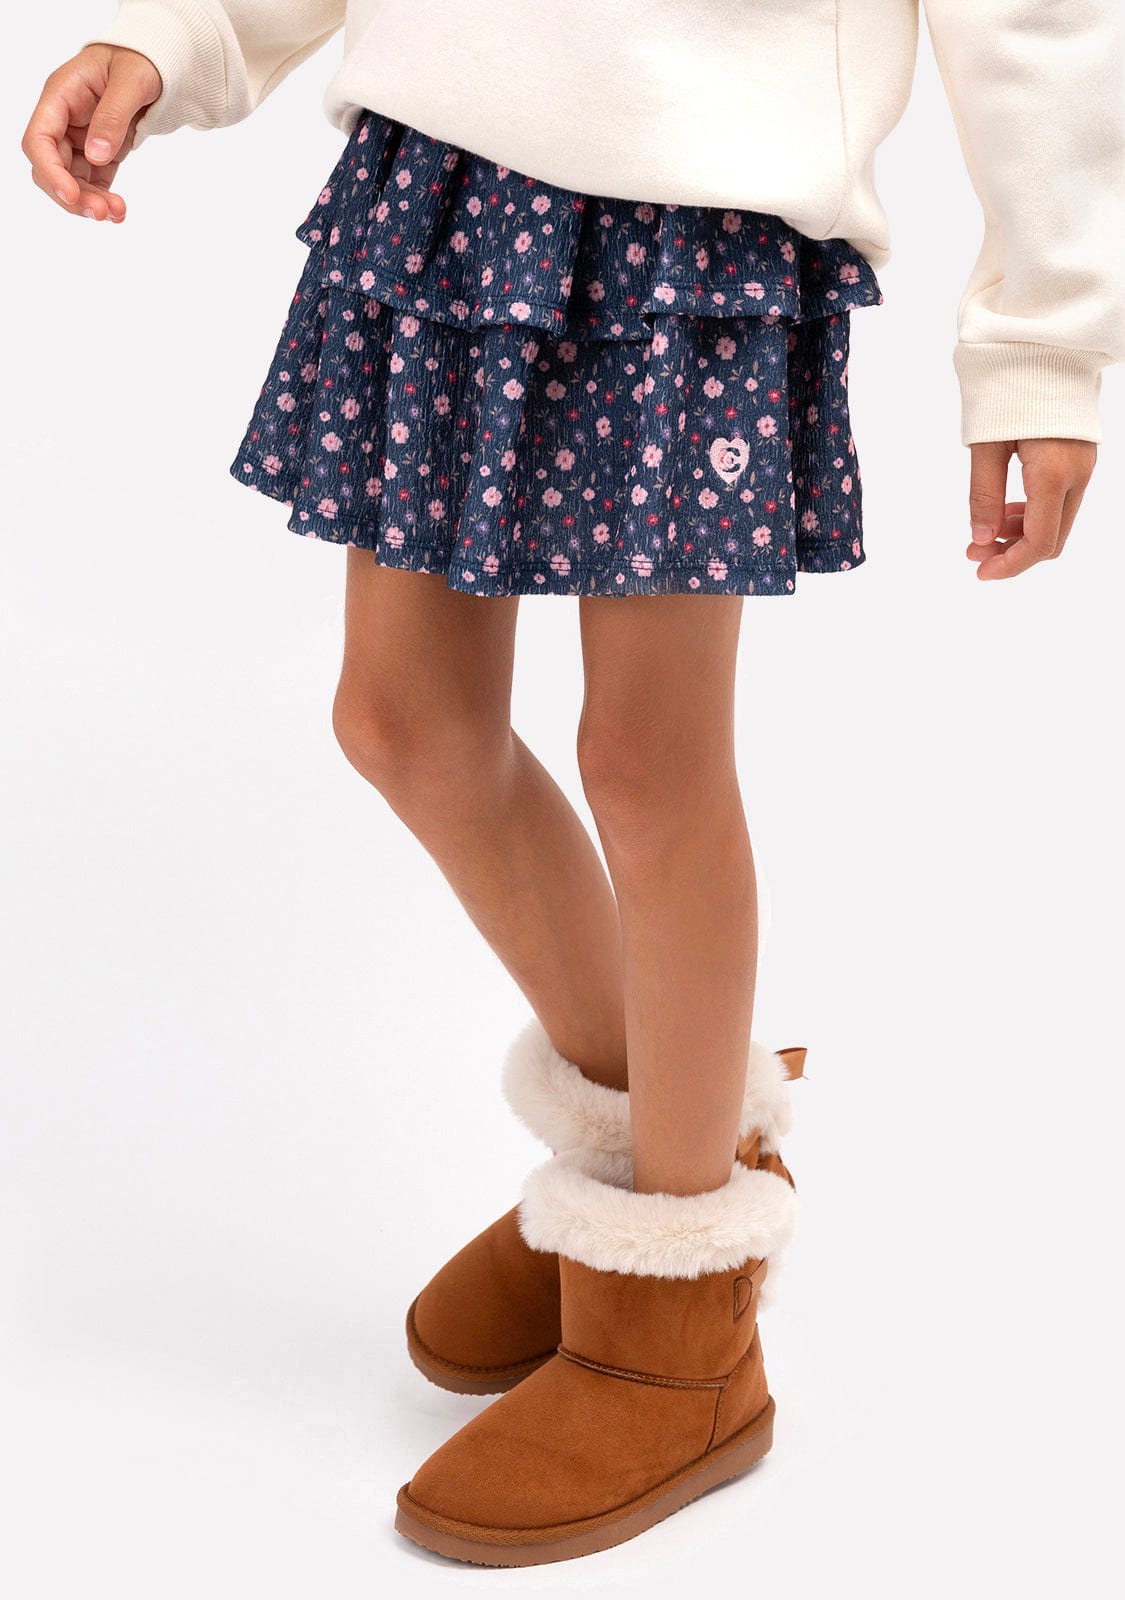 CONGUITOS TEXTIL Clothing Girl's Navy Print Flowers Skirt